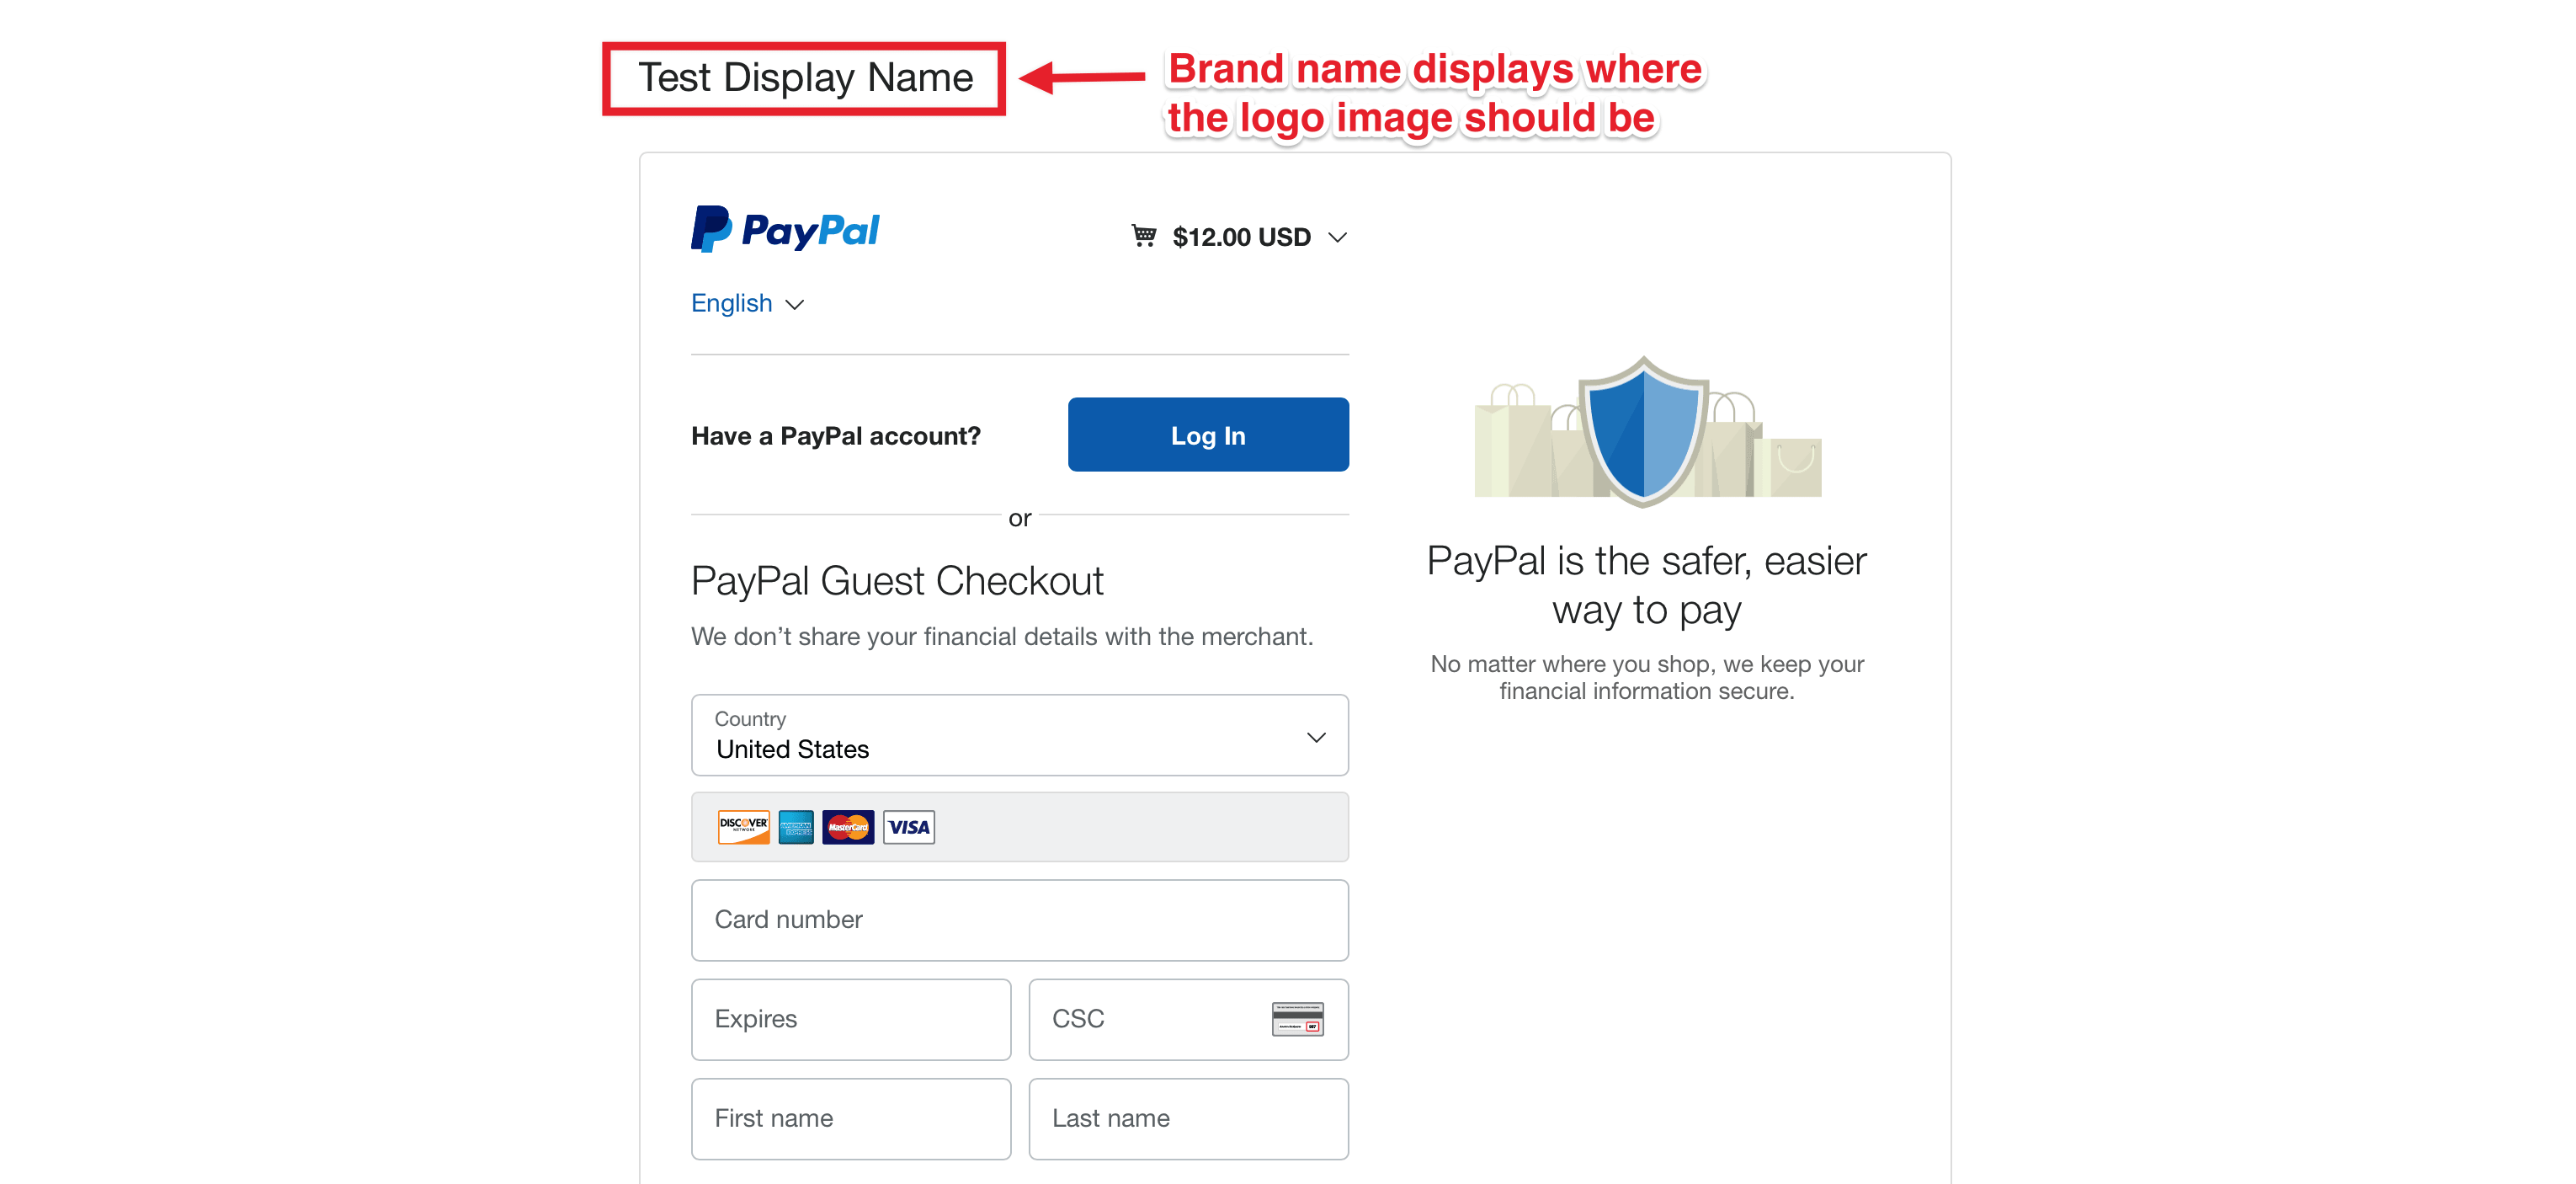 Checkout Logo - Logo Image not displaying in PayPal Checkout page · Issue #371 ...